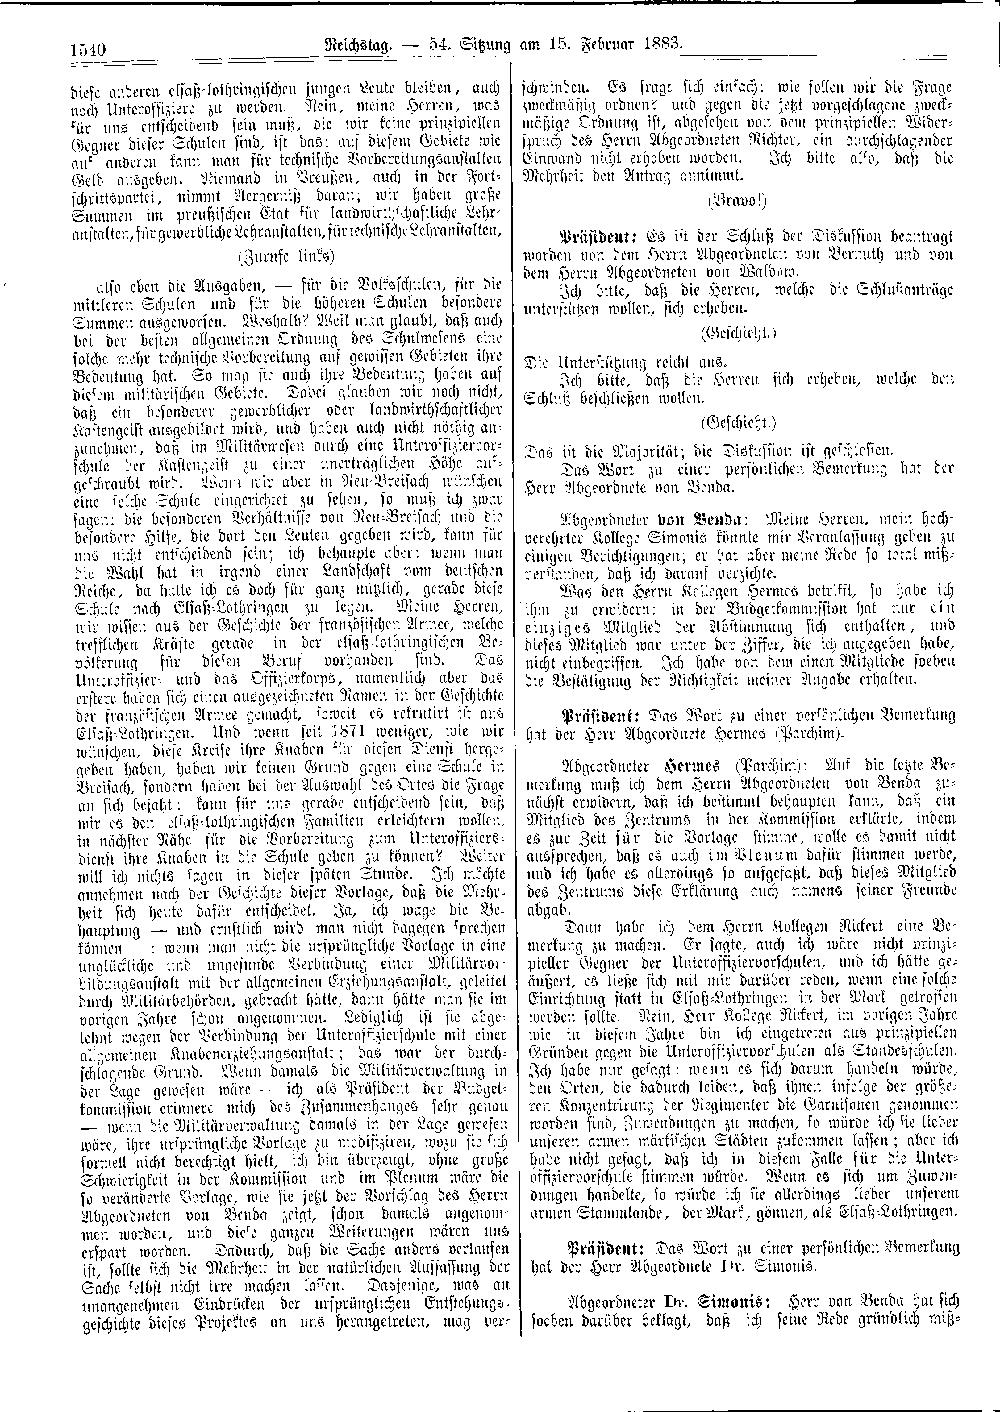 Scan of page 1540